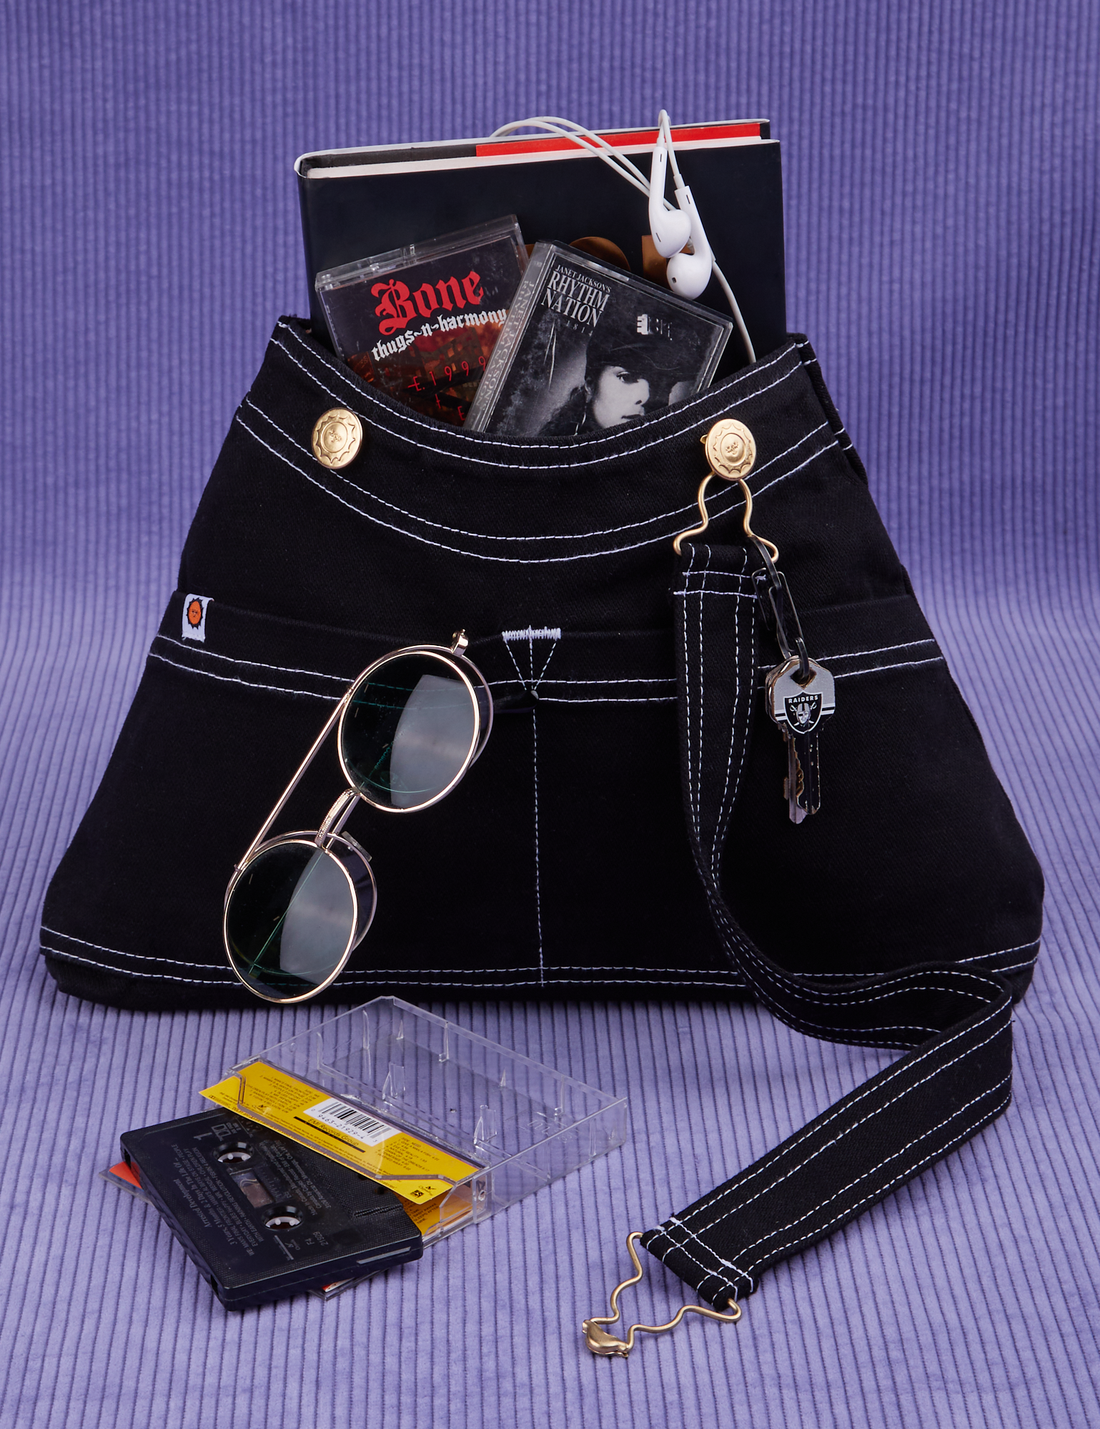 Overall Handbag in Black with book and two cassette tapes in main compartment. Keys hanging from brass hardware in the front. Sunglasses in the front pocket.